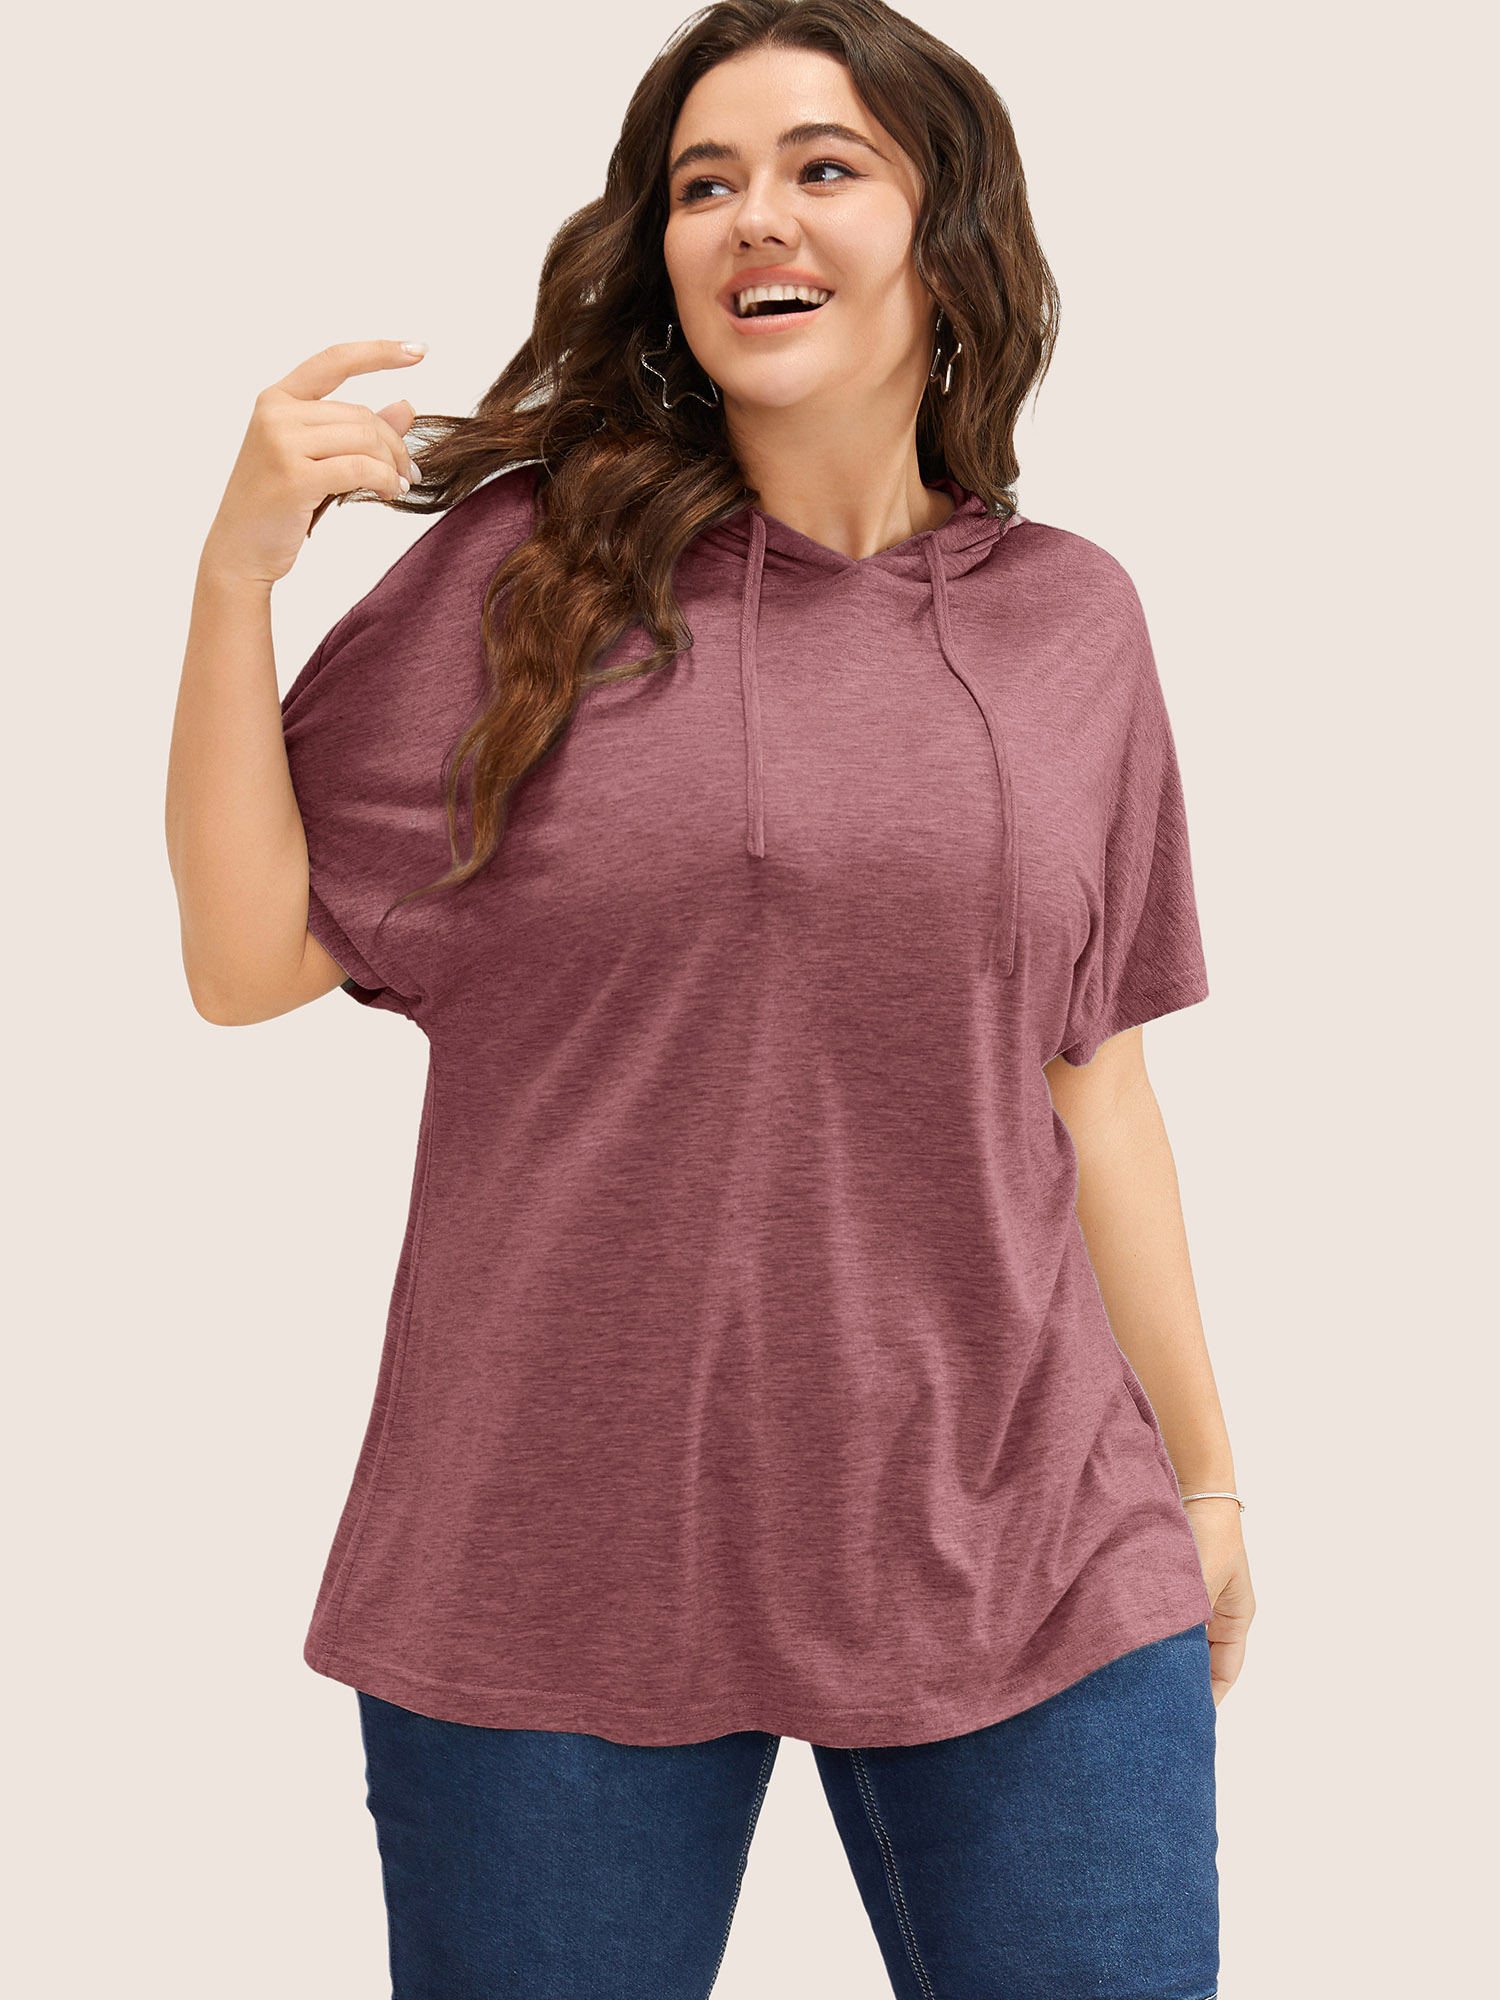 

Plus Size Solid Batwing Sleeve Drawstring Hooded T-shirt Russet Women Casual Drawstring Plain Hooded Everyday T-shirts BloomChic